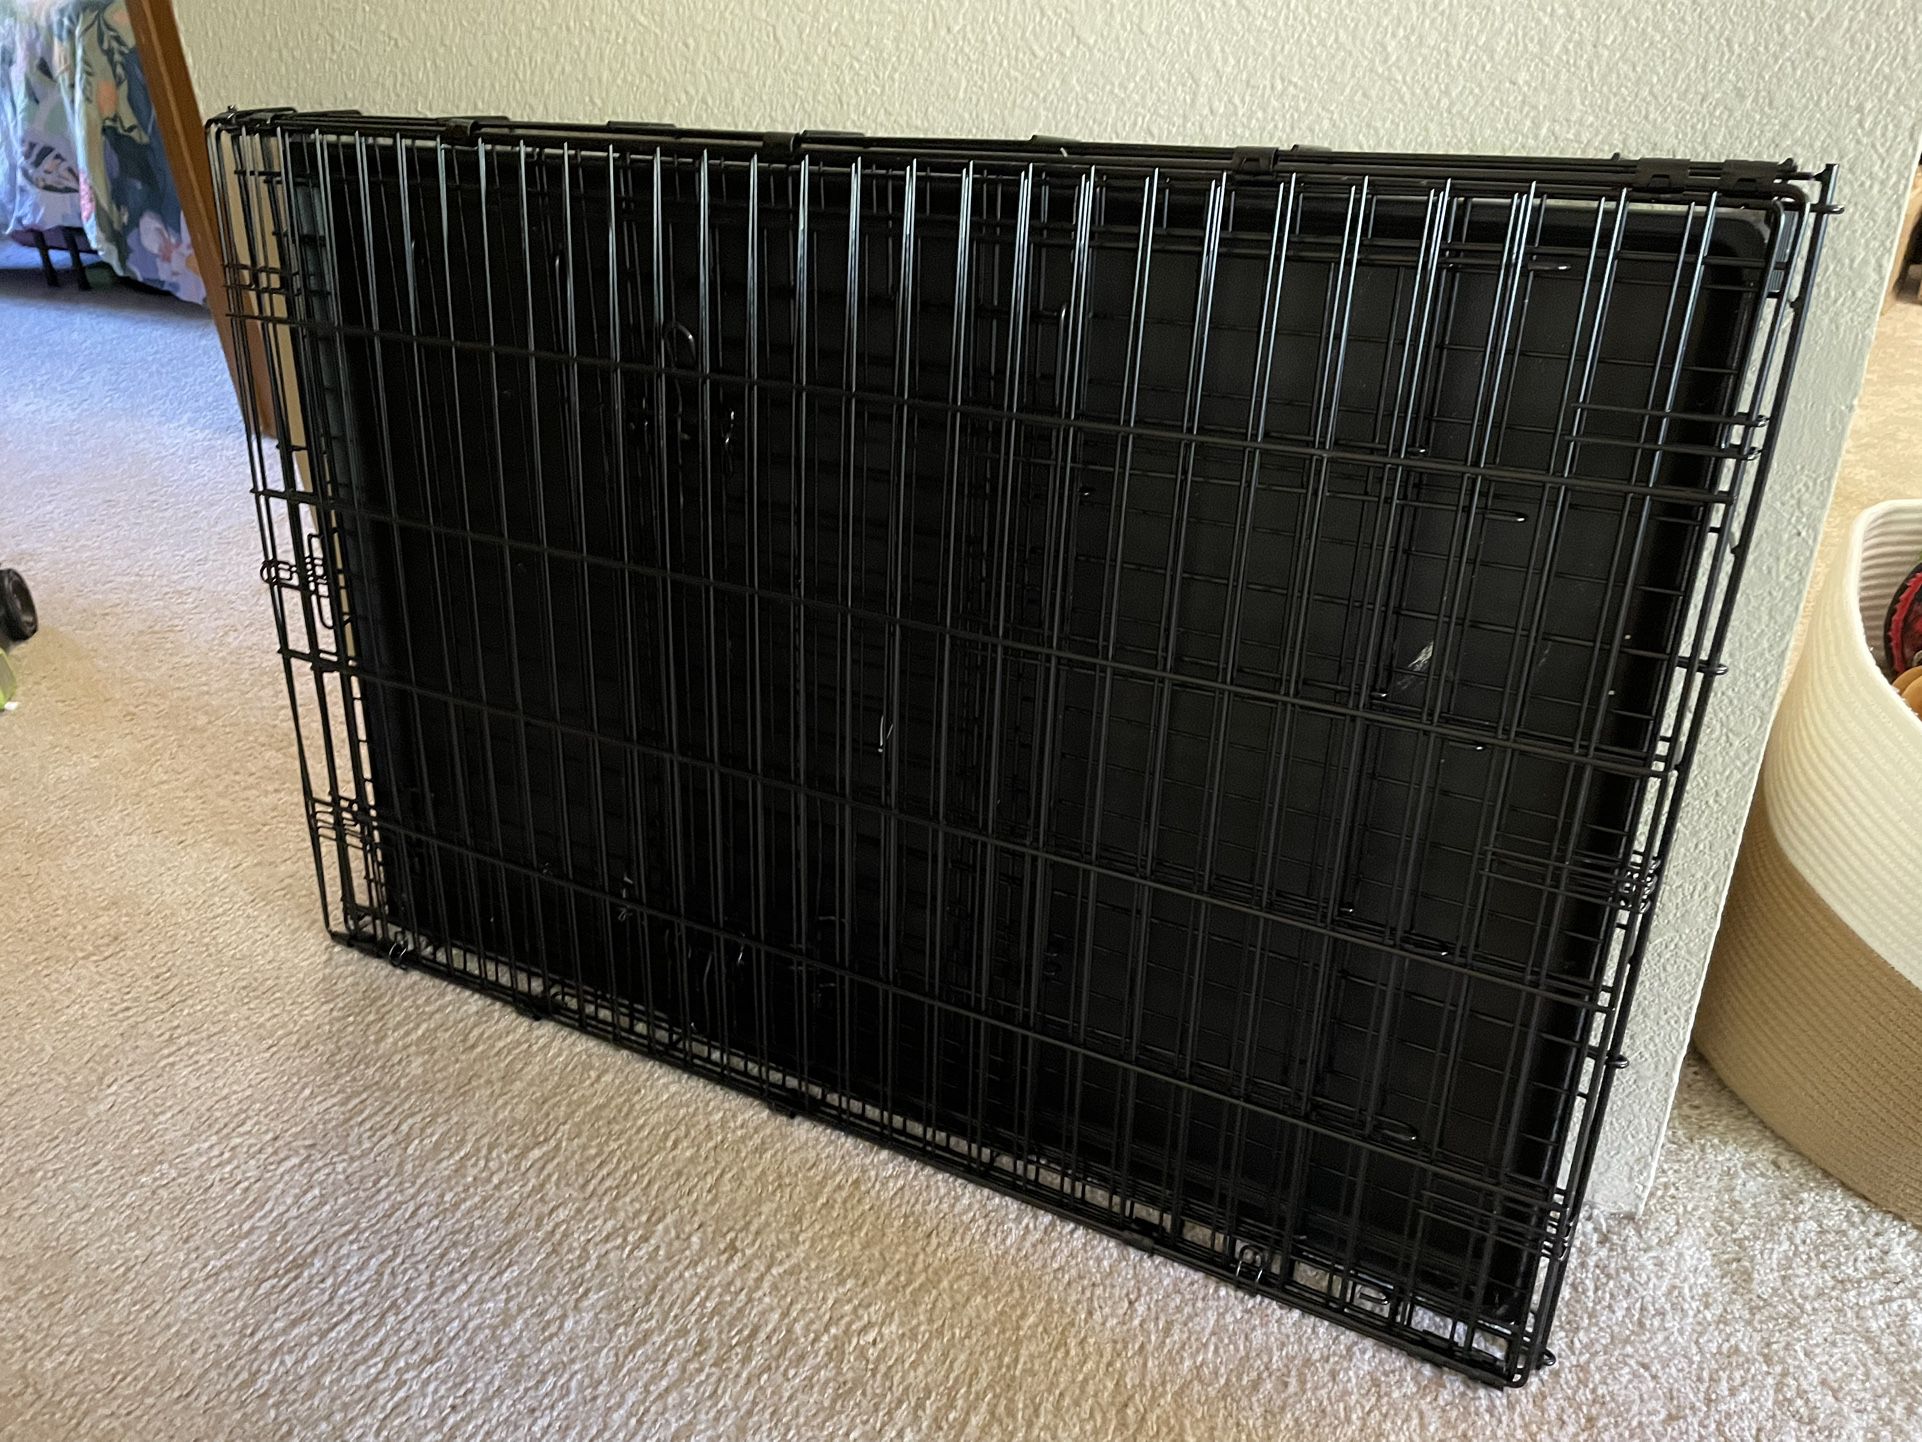 42” Collapsible Dog Crate